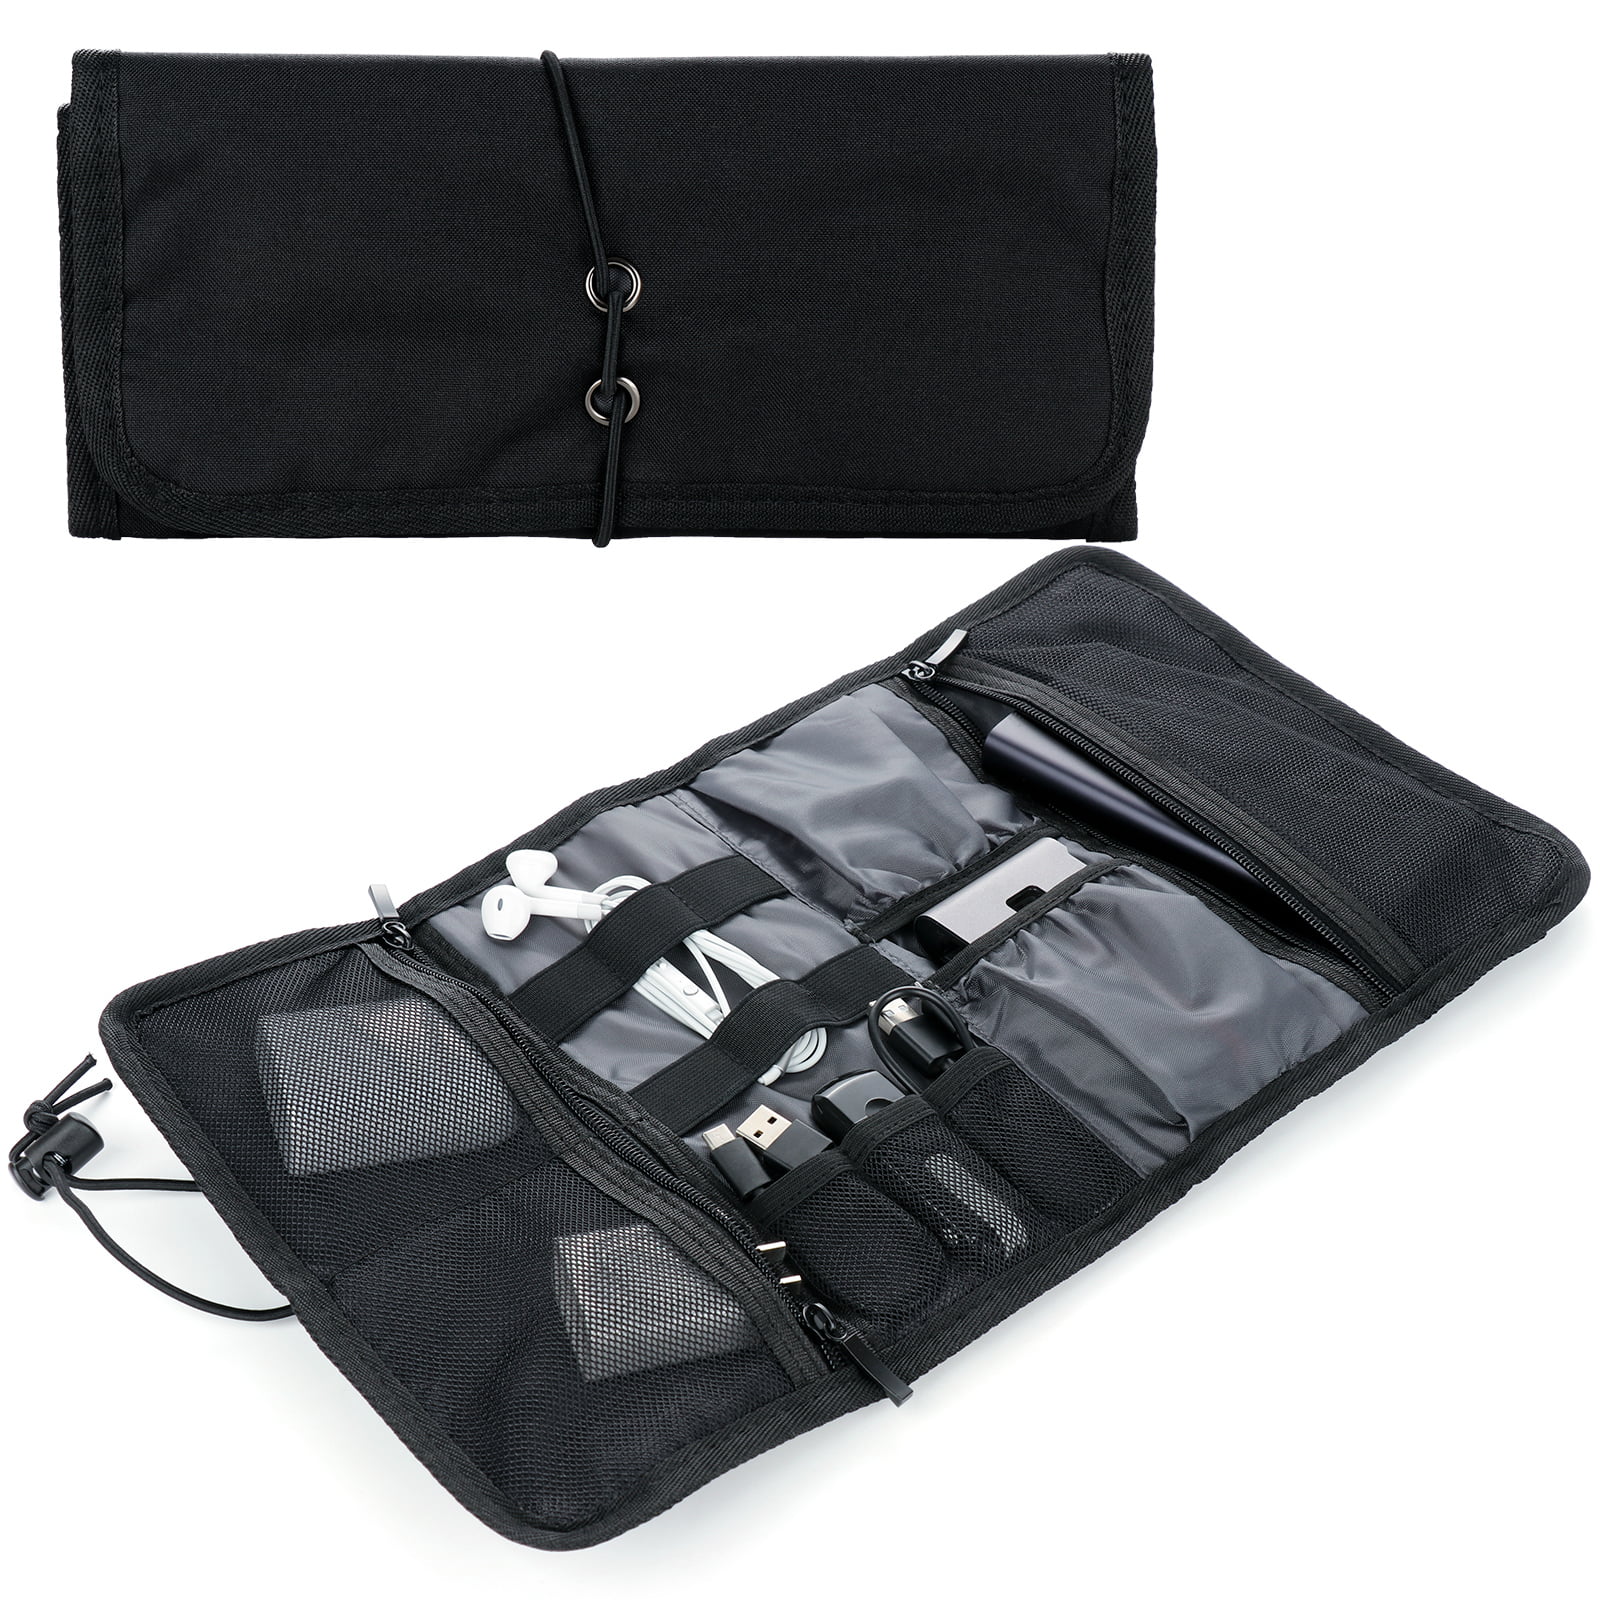 SD Memory Cards Cable Organizer Electronic Accessories Travel Bag Mini USB Flash Drive Case Bag Wallet 